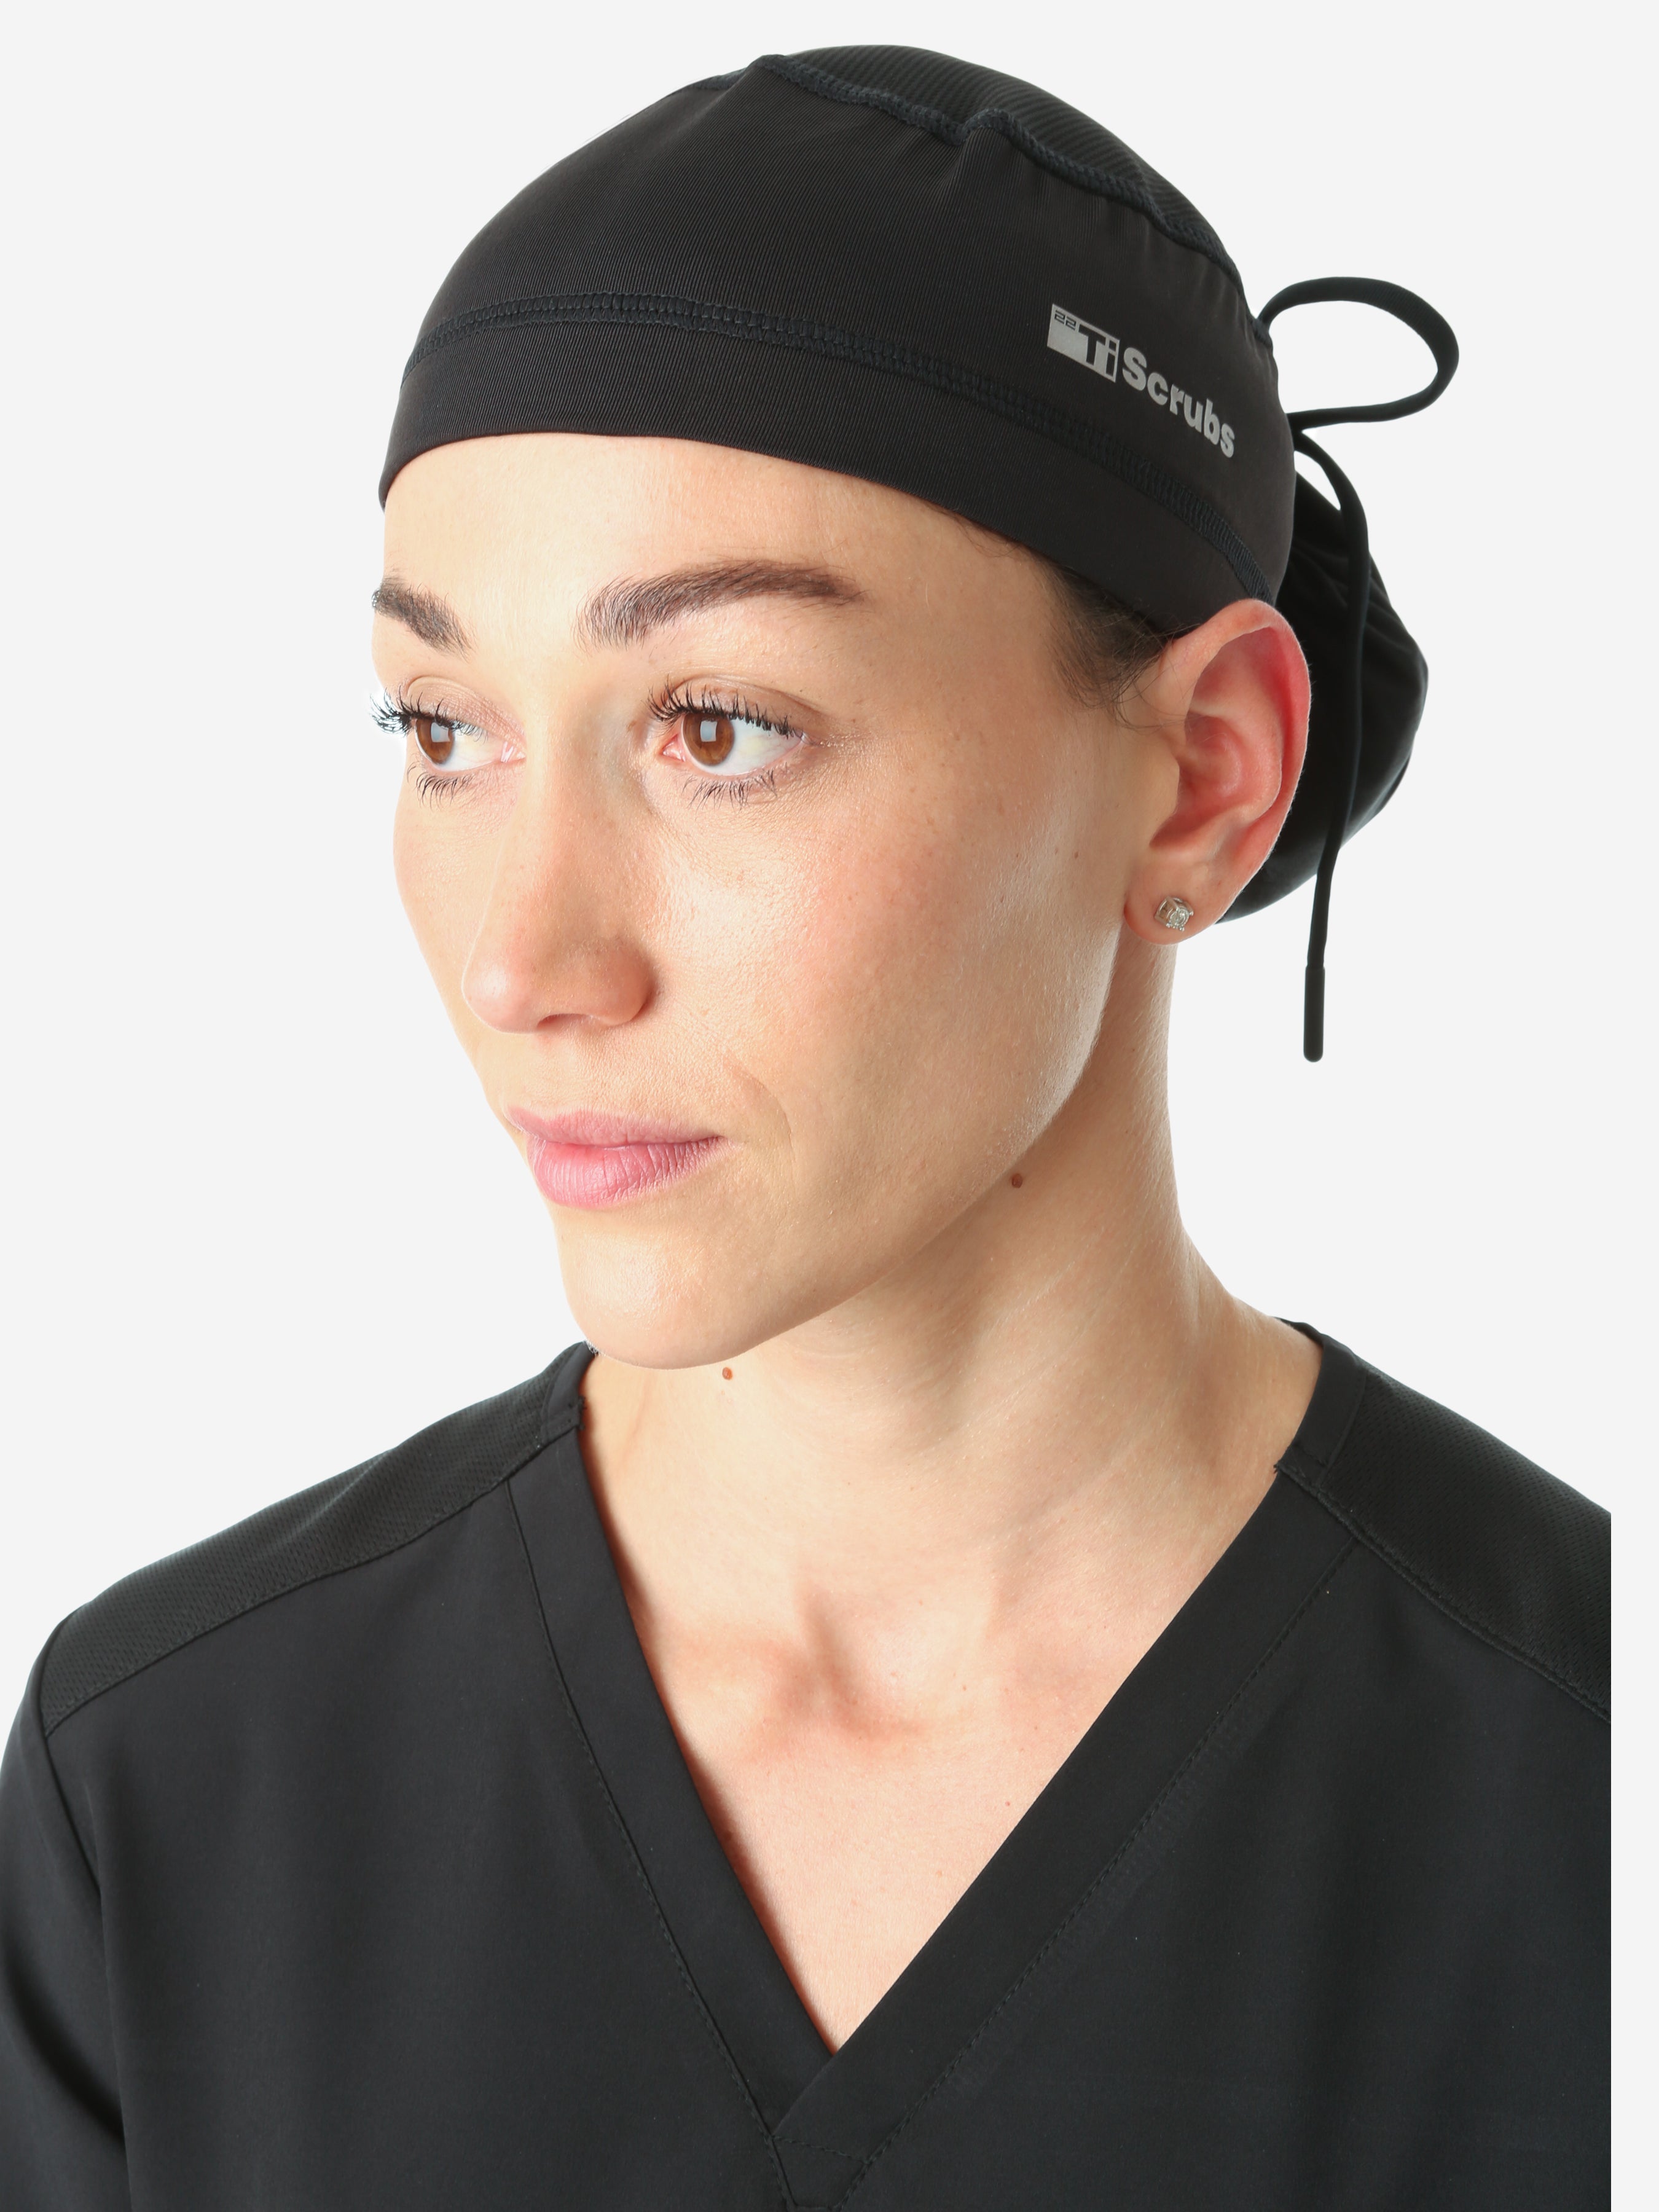 TiScrubs Women's Scrub Cap Real Front and Side View